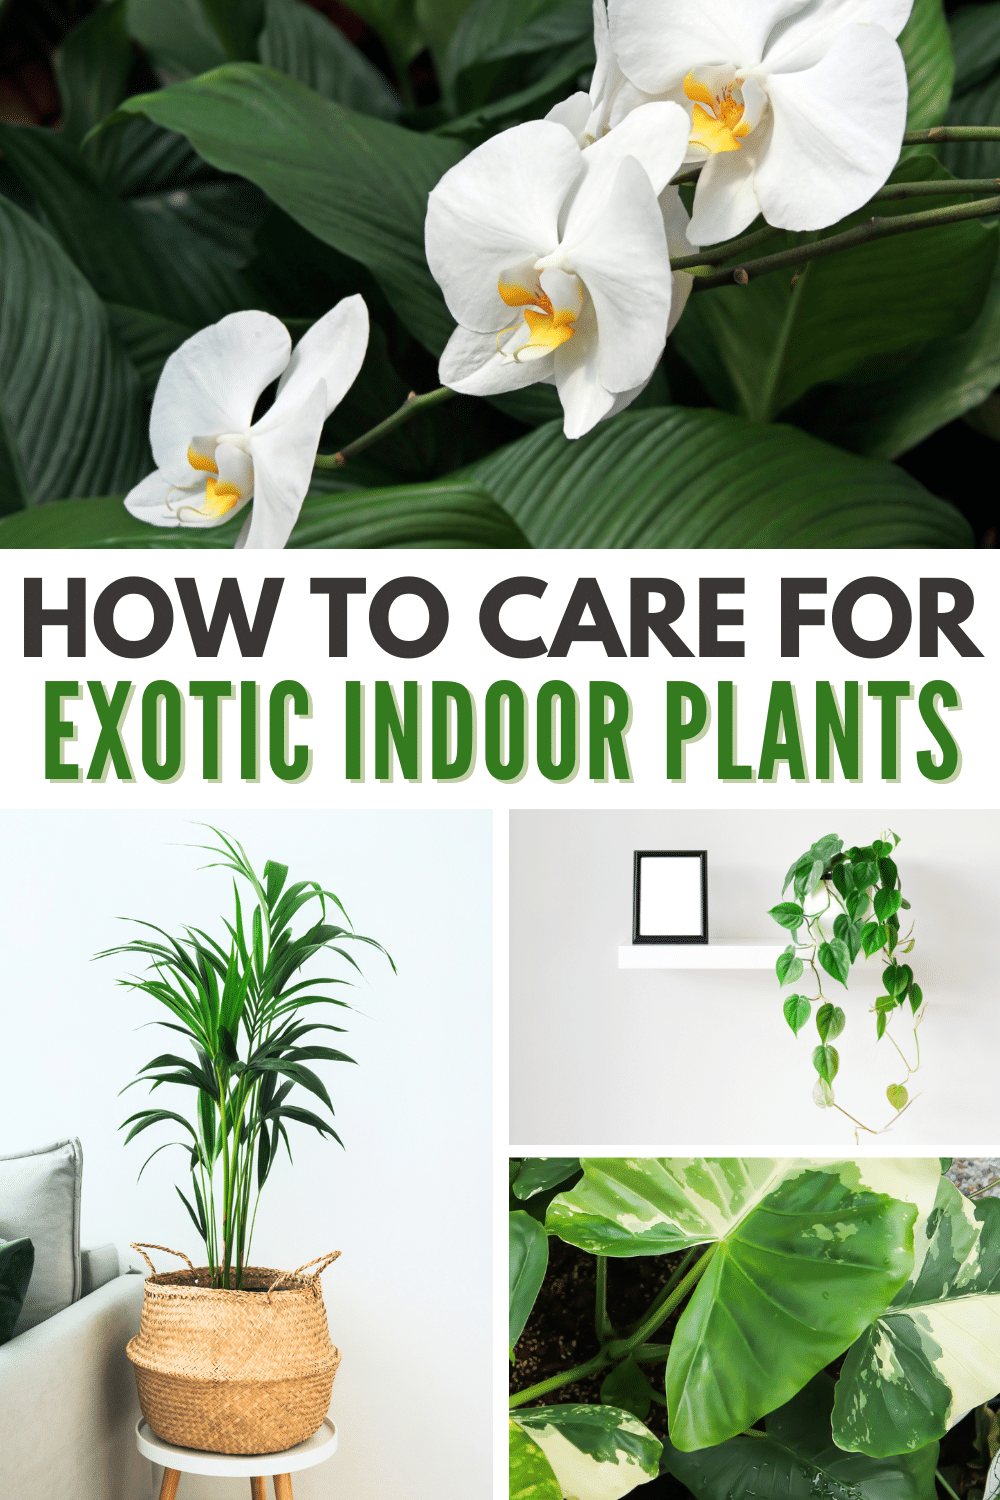 How to care for exotic indoor plants.